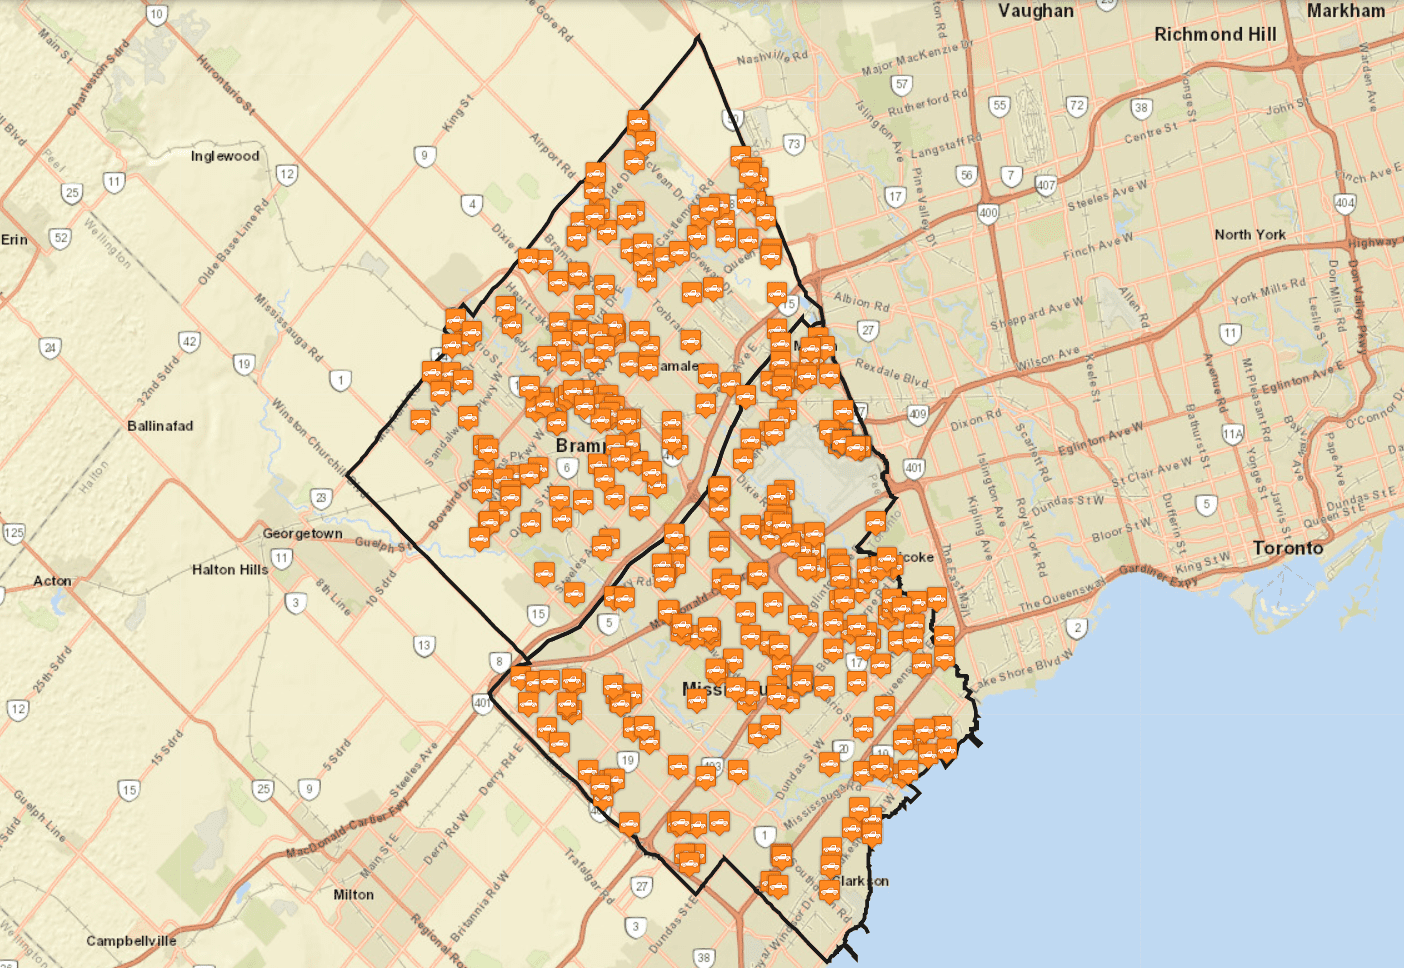 Peel Regional Police crime map showing the location of 355 auto thefts in the past 30 days.